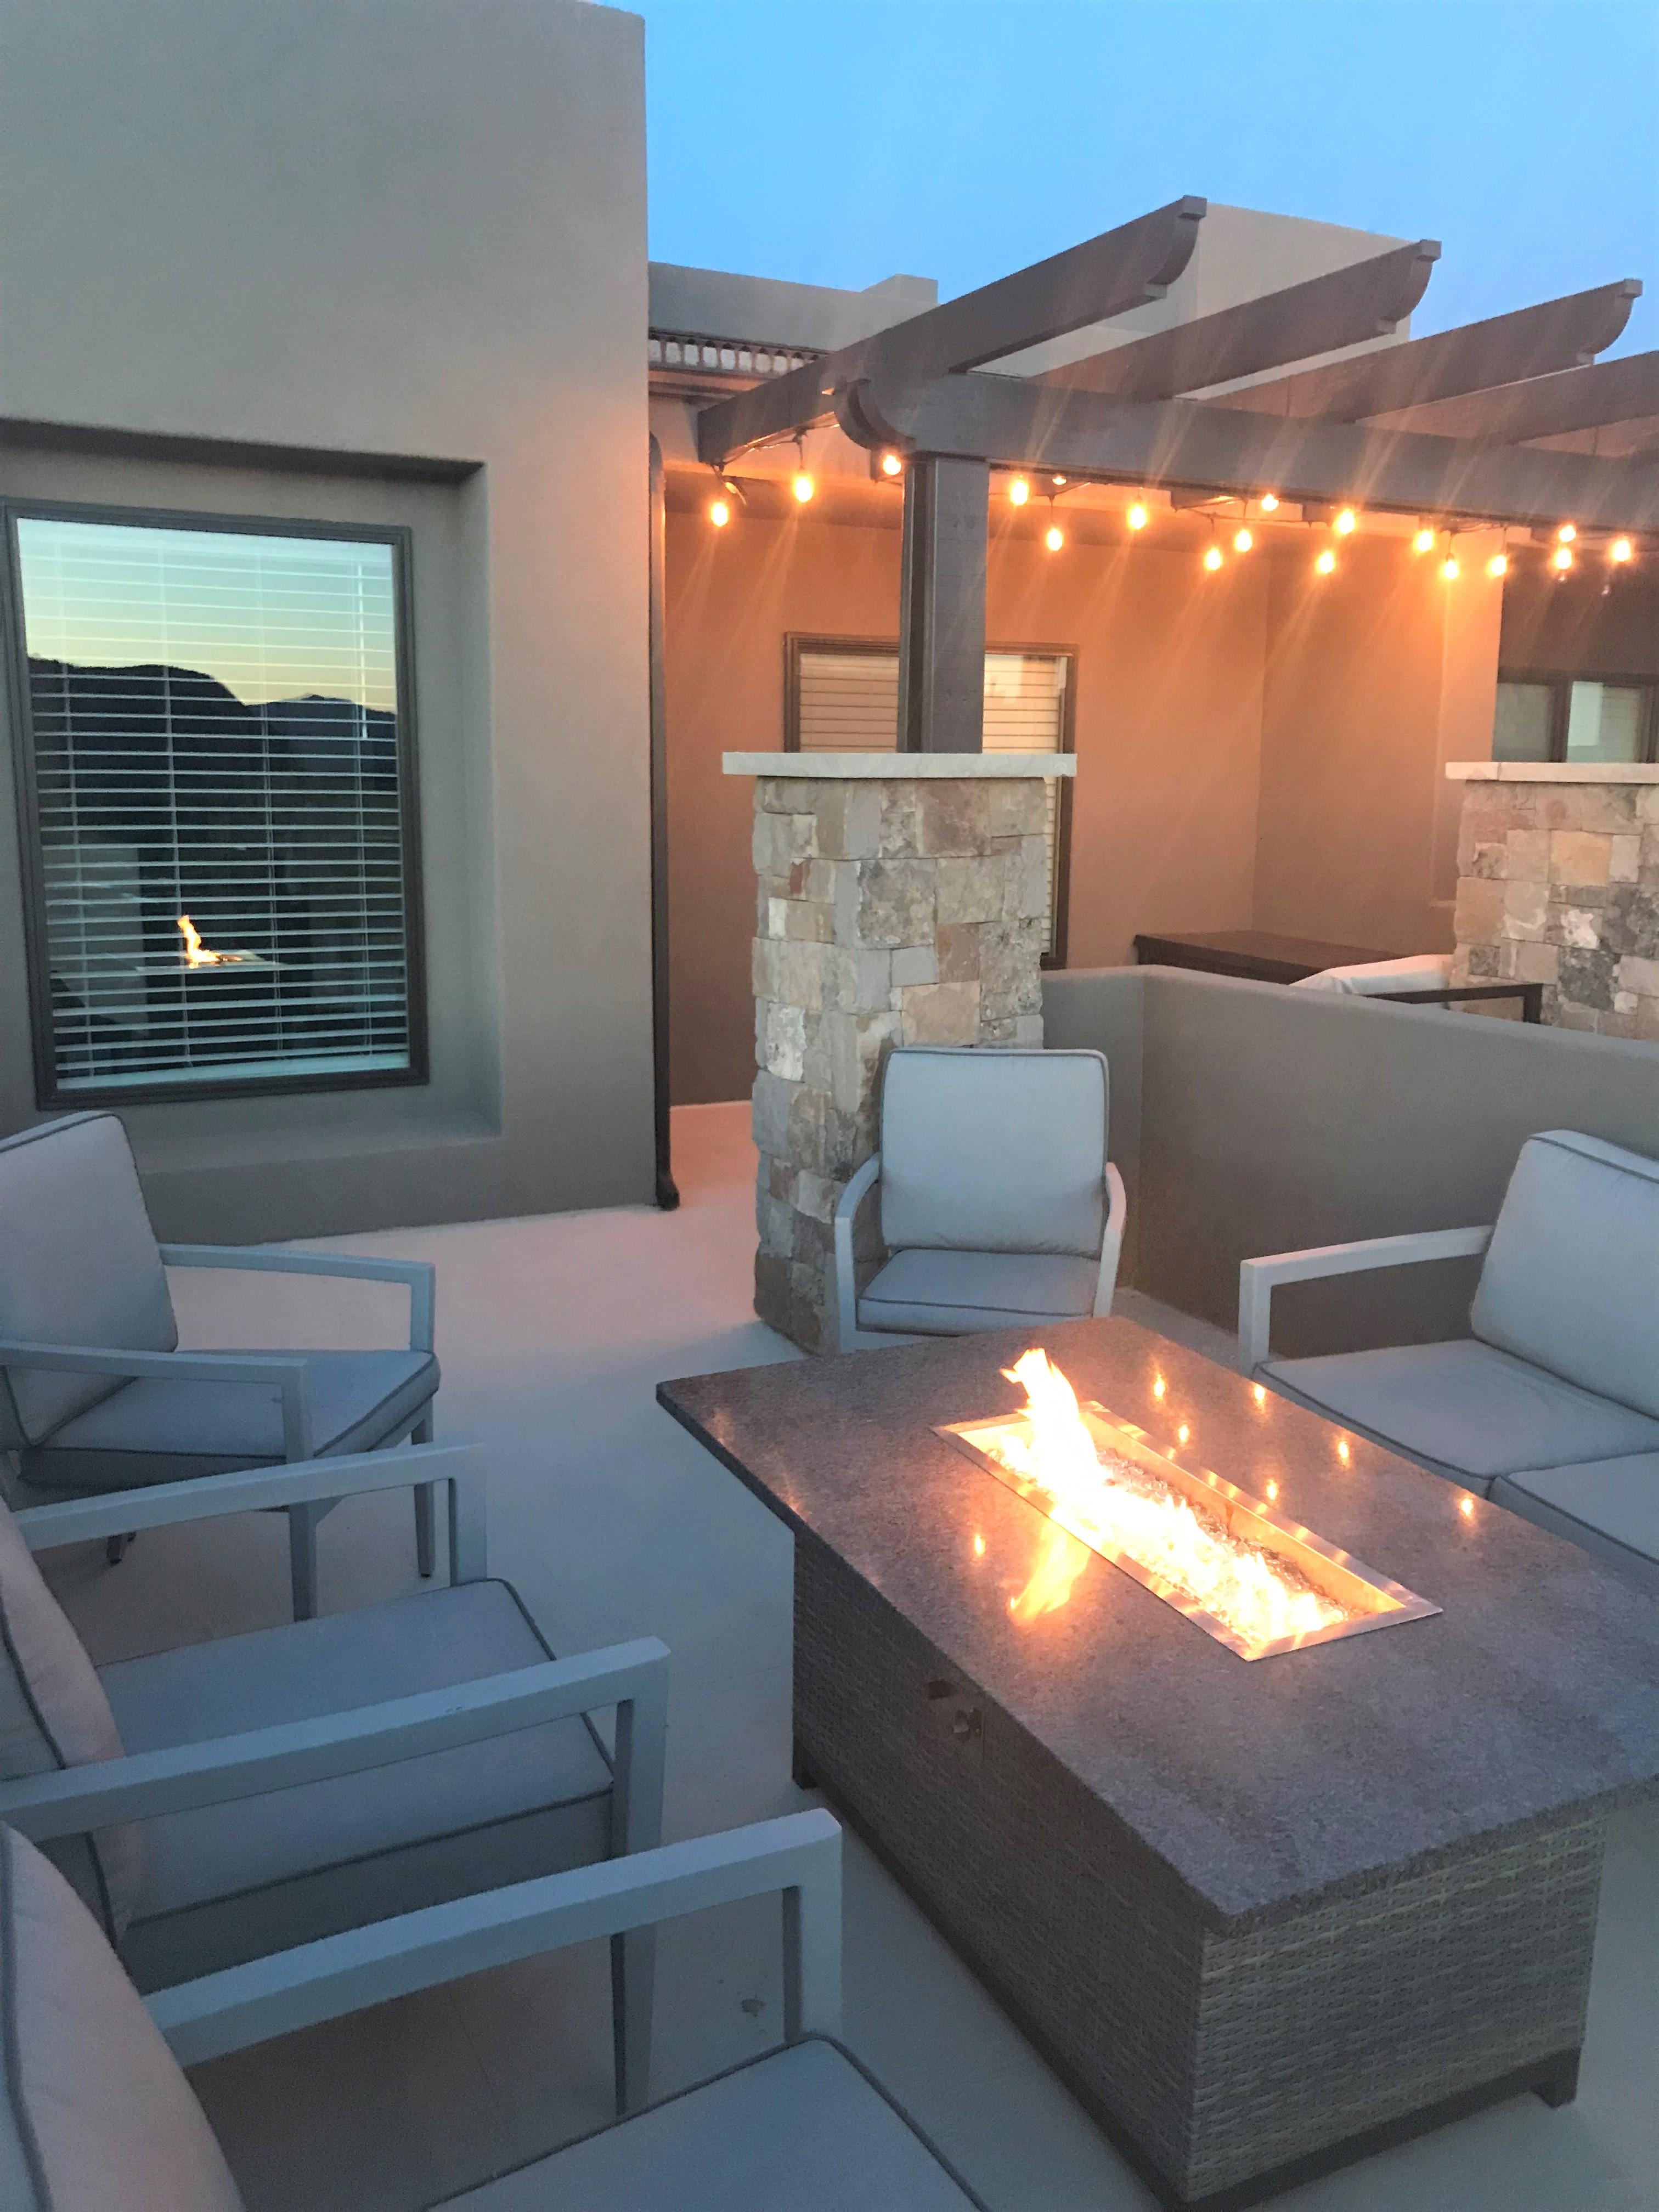 Enjoy a stunning sunset or sunrise from the front patio while sitting around our cozy outdoor firepit.